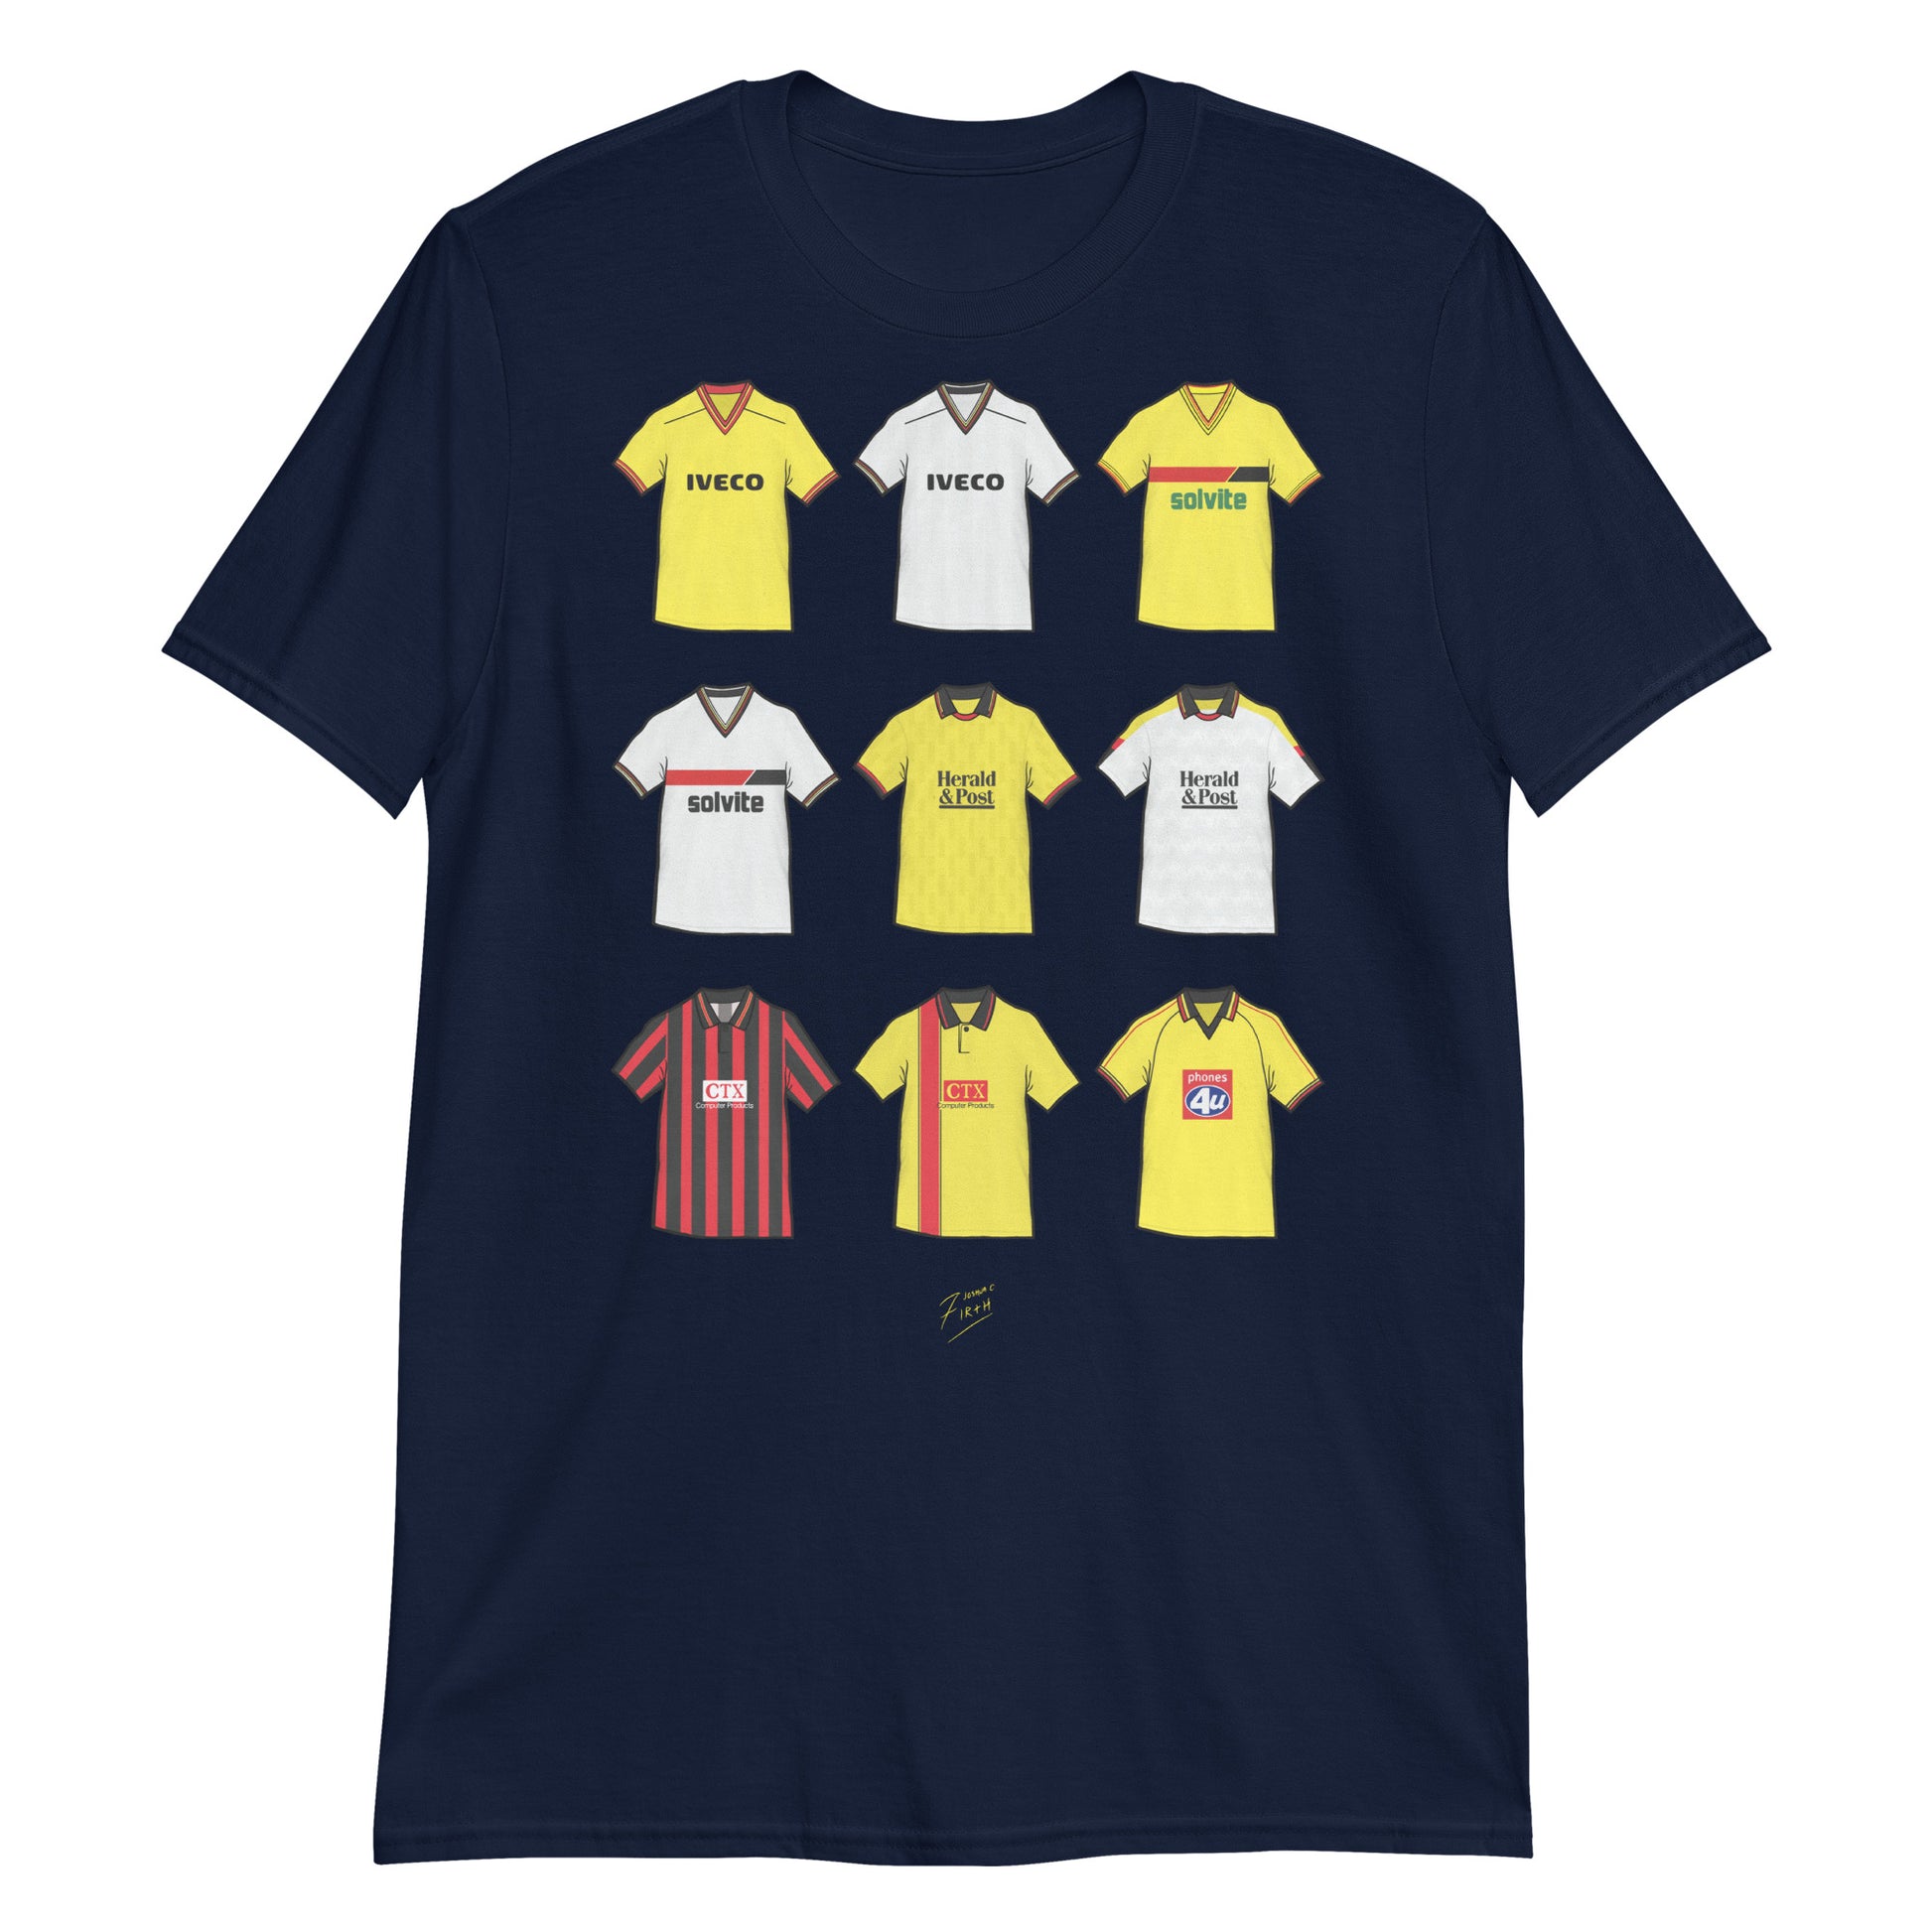 Navy Blue Watford themed football t-shirts inspired by their retro jerseys of the past!